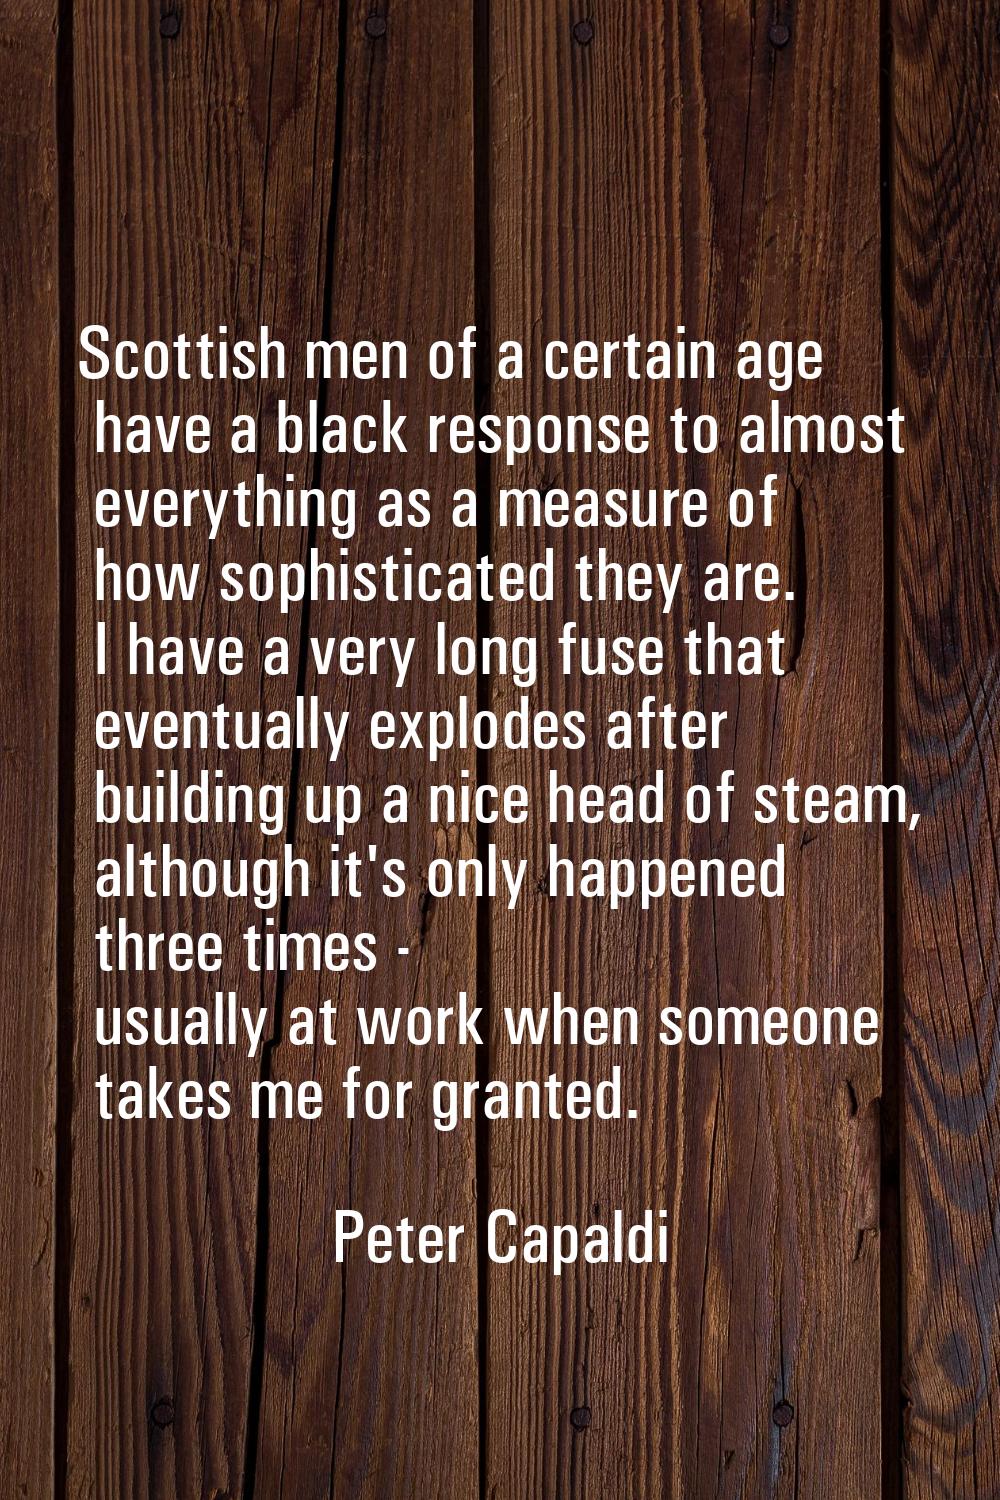 Scottish men of a certain age have a black response to almost everything as a measure of how sophis